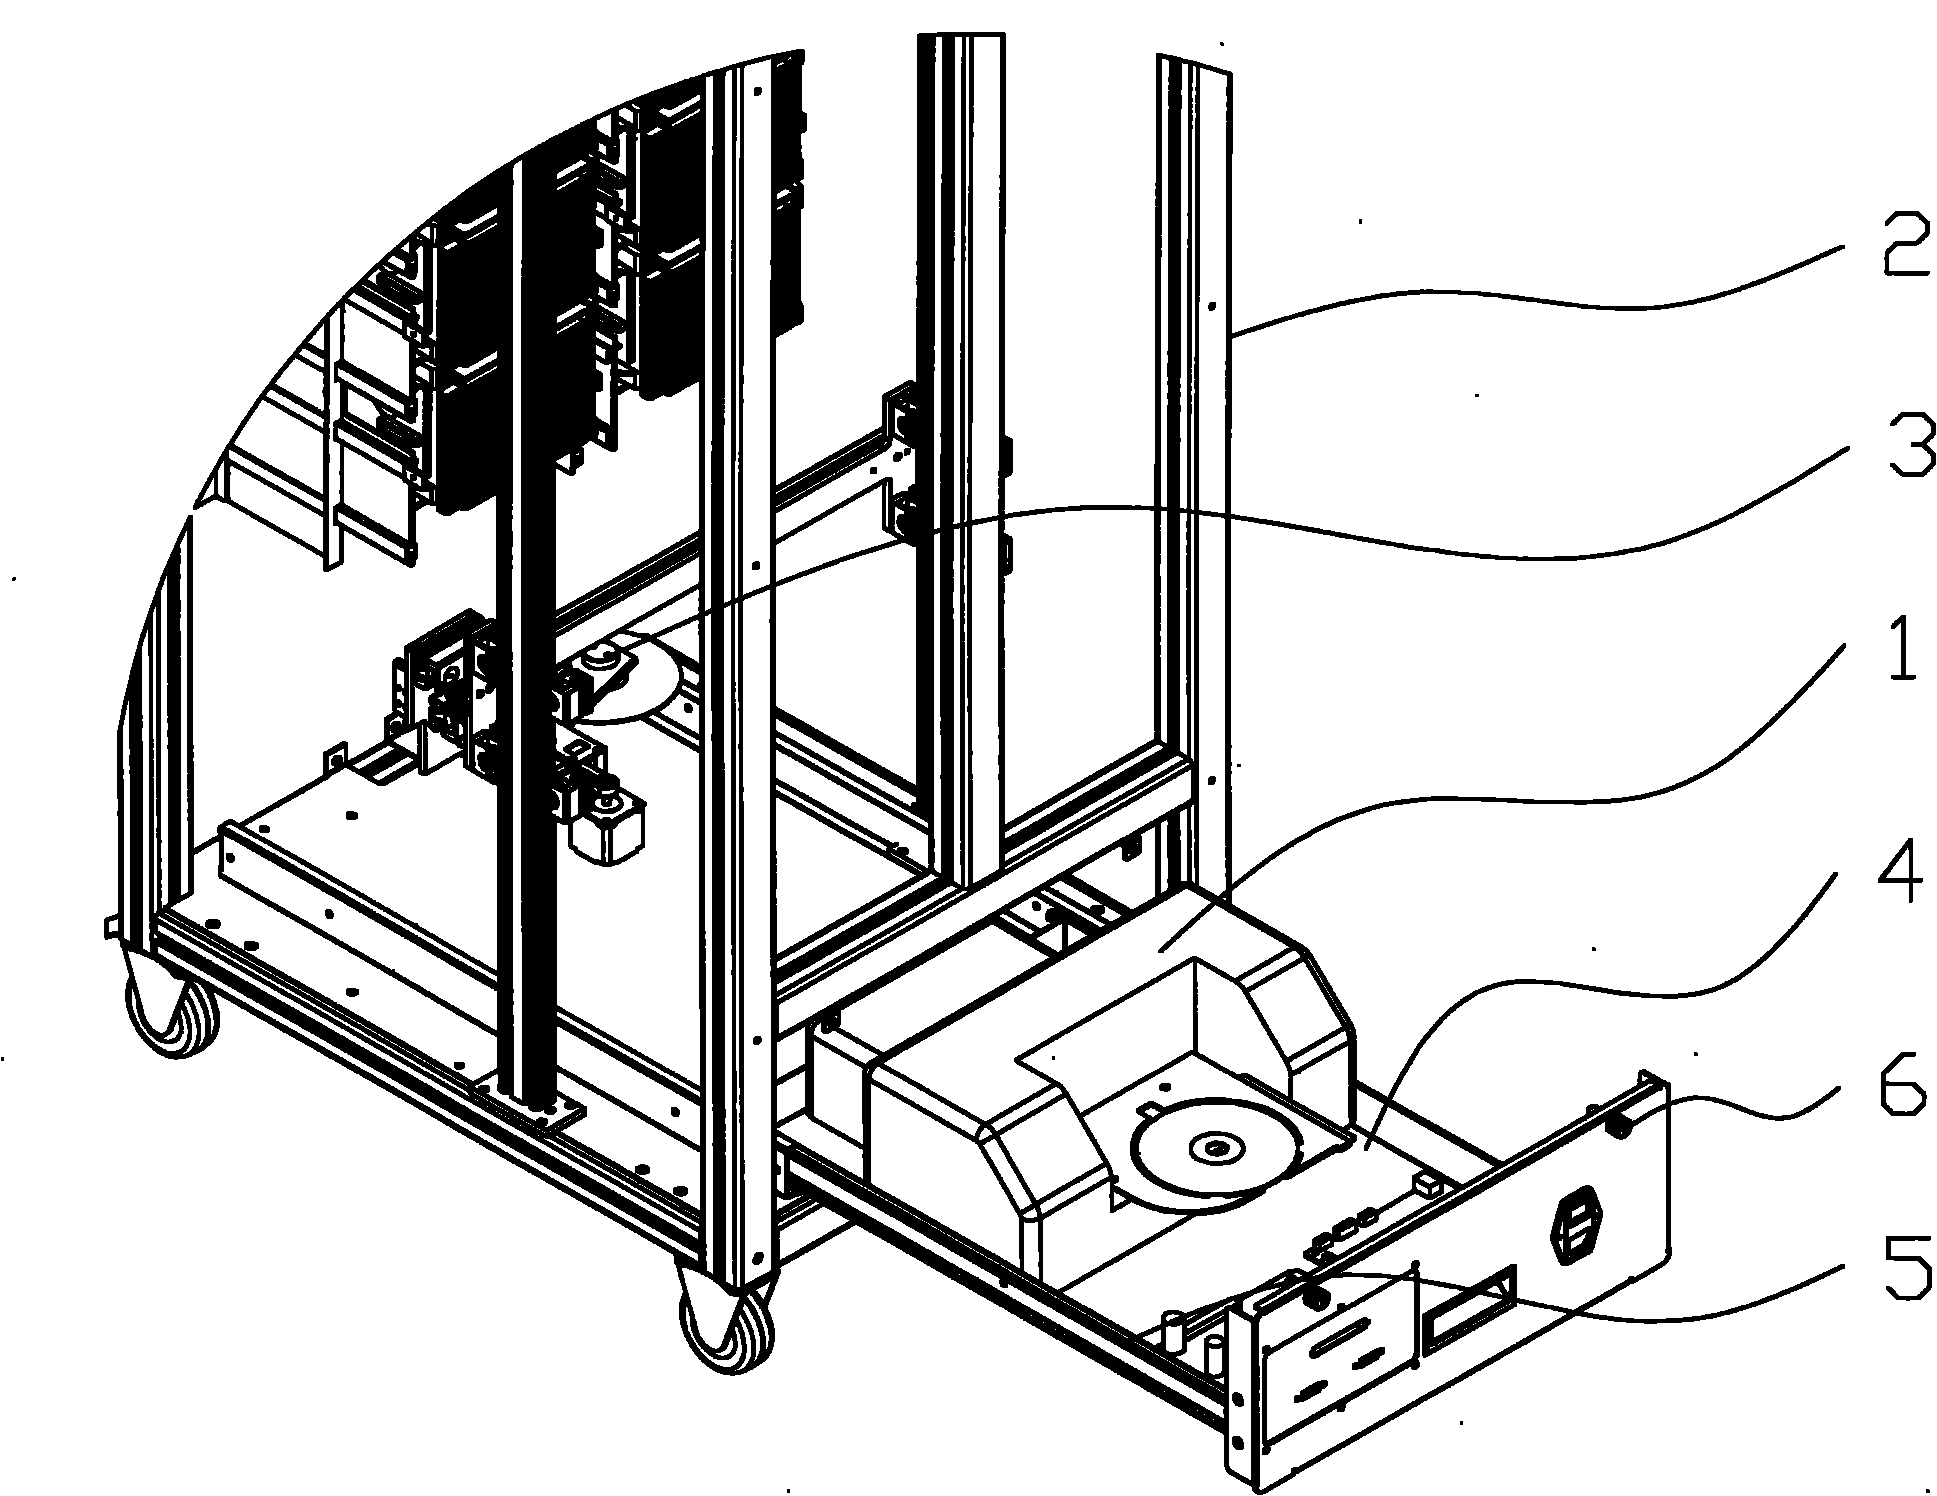 Disc surface automatic printing device used for compact disc library